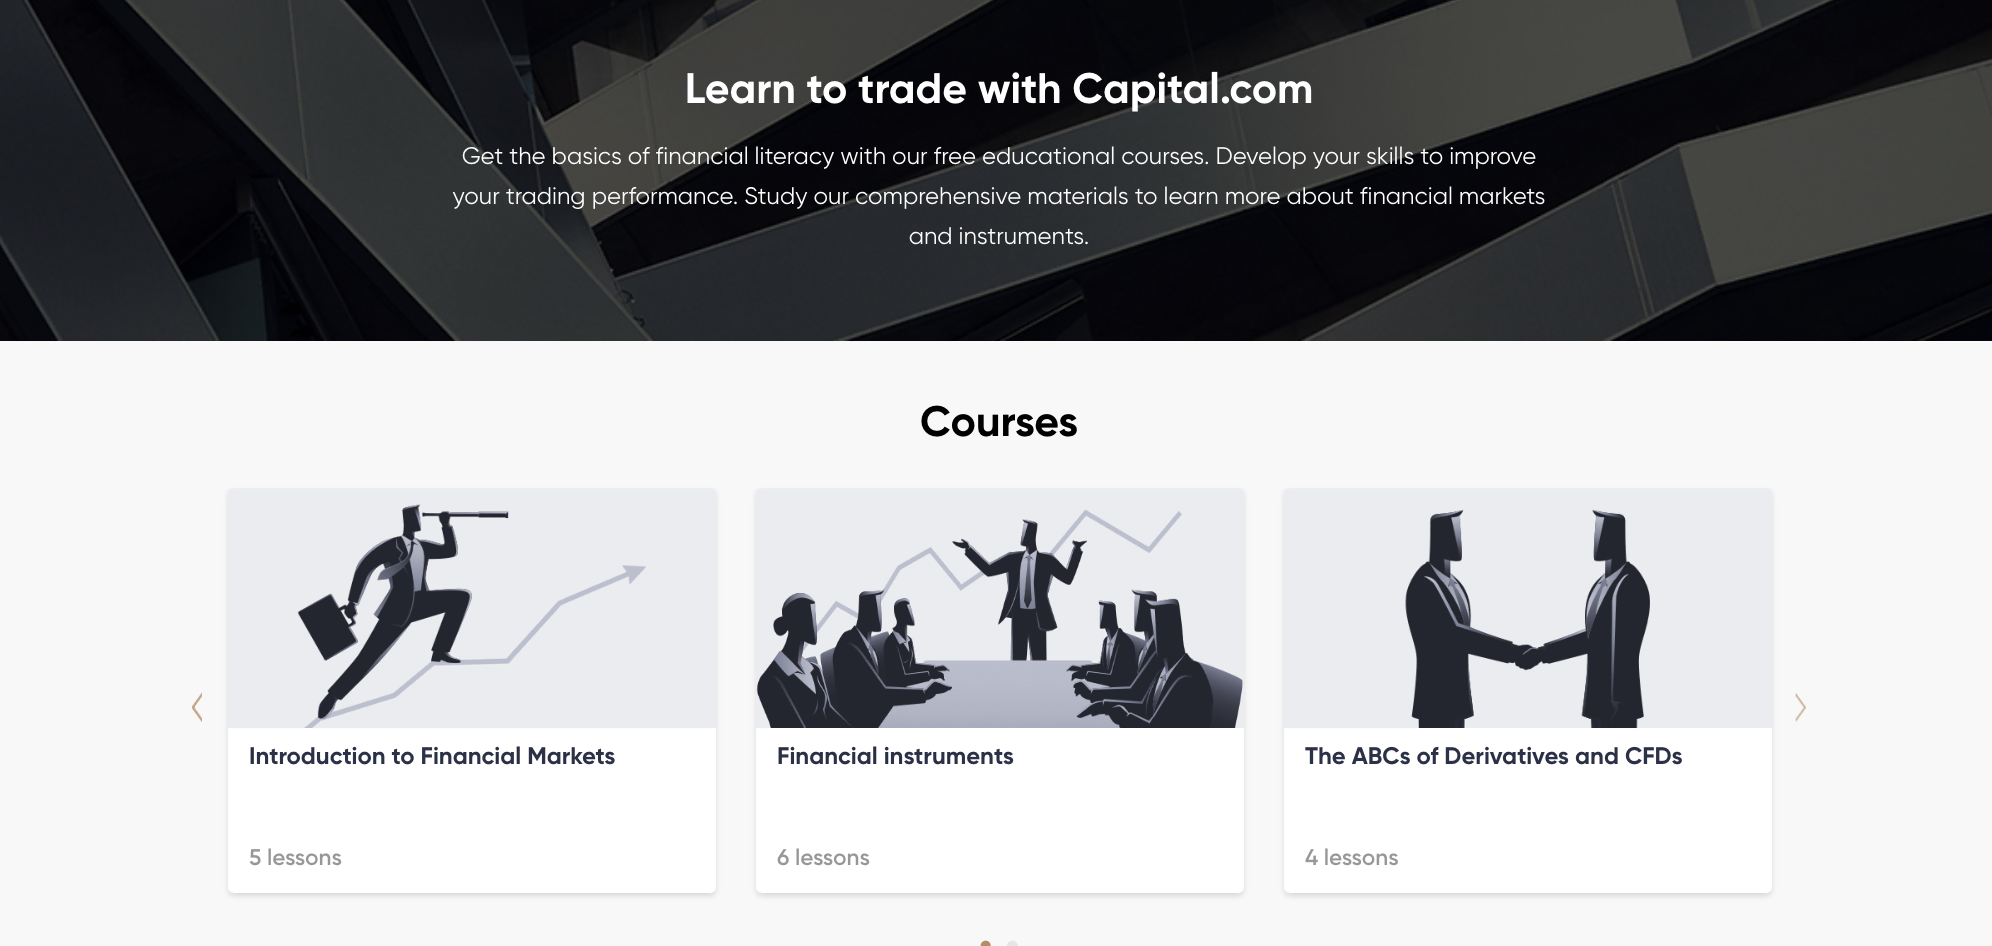 Capital.com has a whole section where you can learn everything about trading